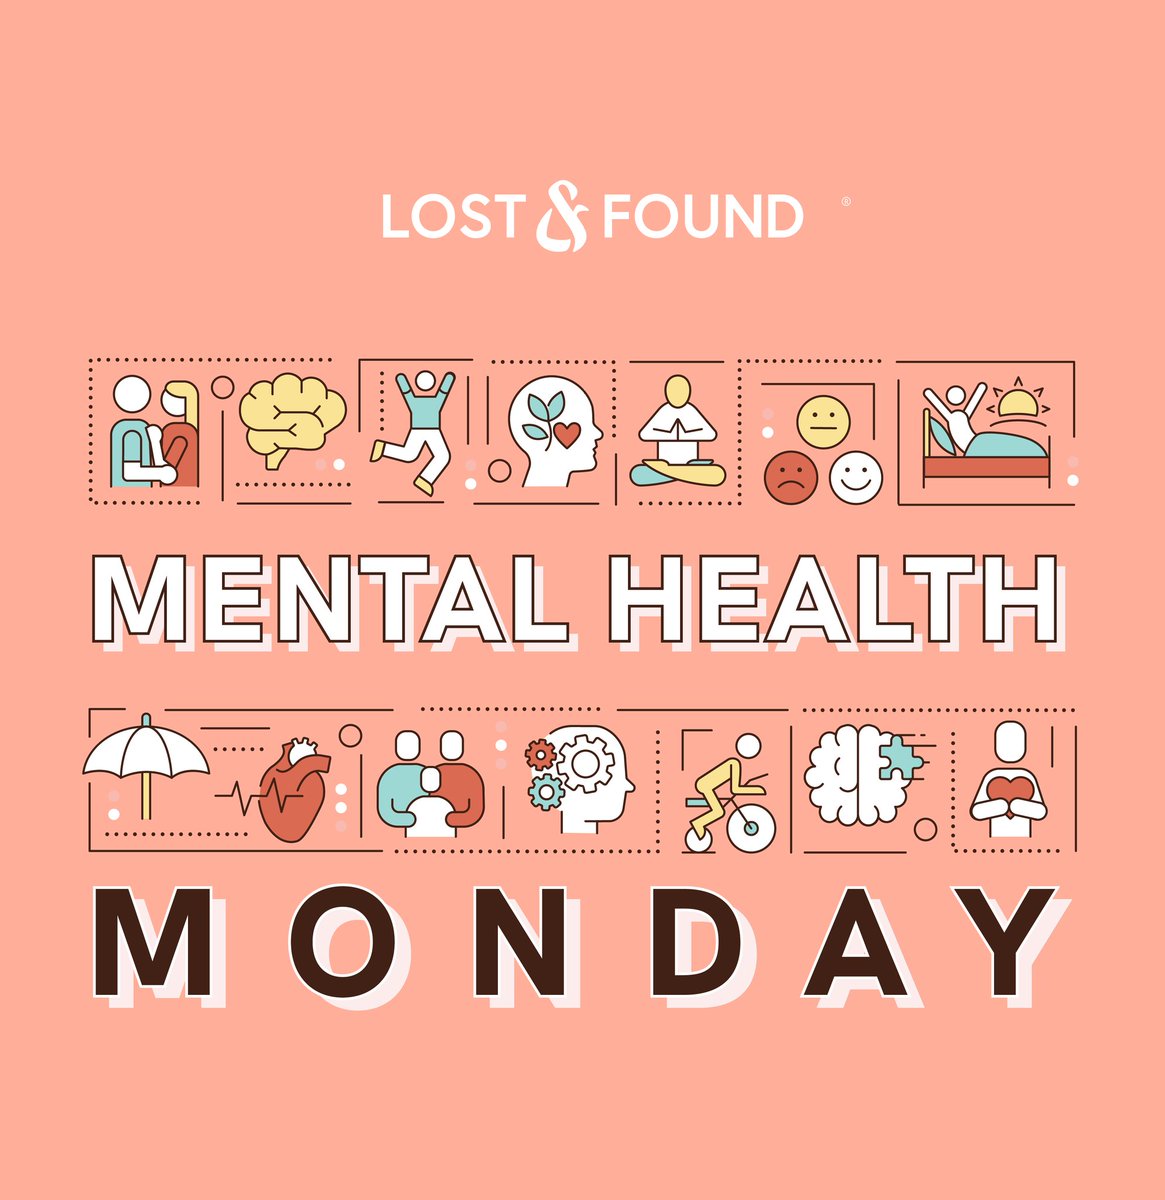 Iiits mental health monday!

How we doing yall?

I'm doing good just busy busy with work as per usual! 

My DMs are open we can get through this together 🫶

#mentalhealth #MentalHealthMonday #MentalHealthMatters